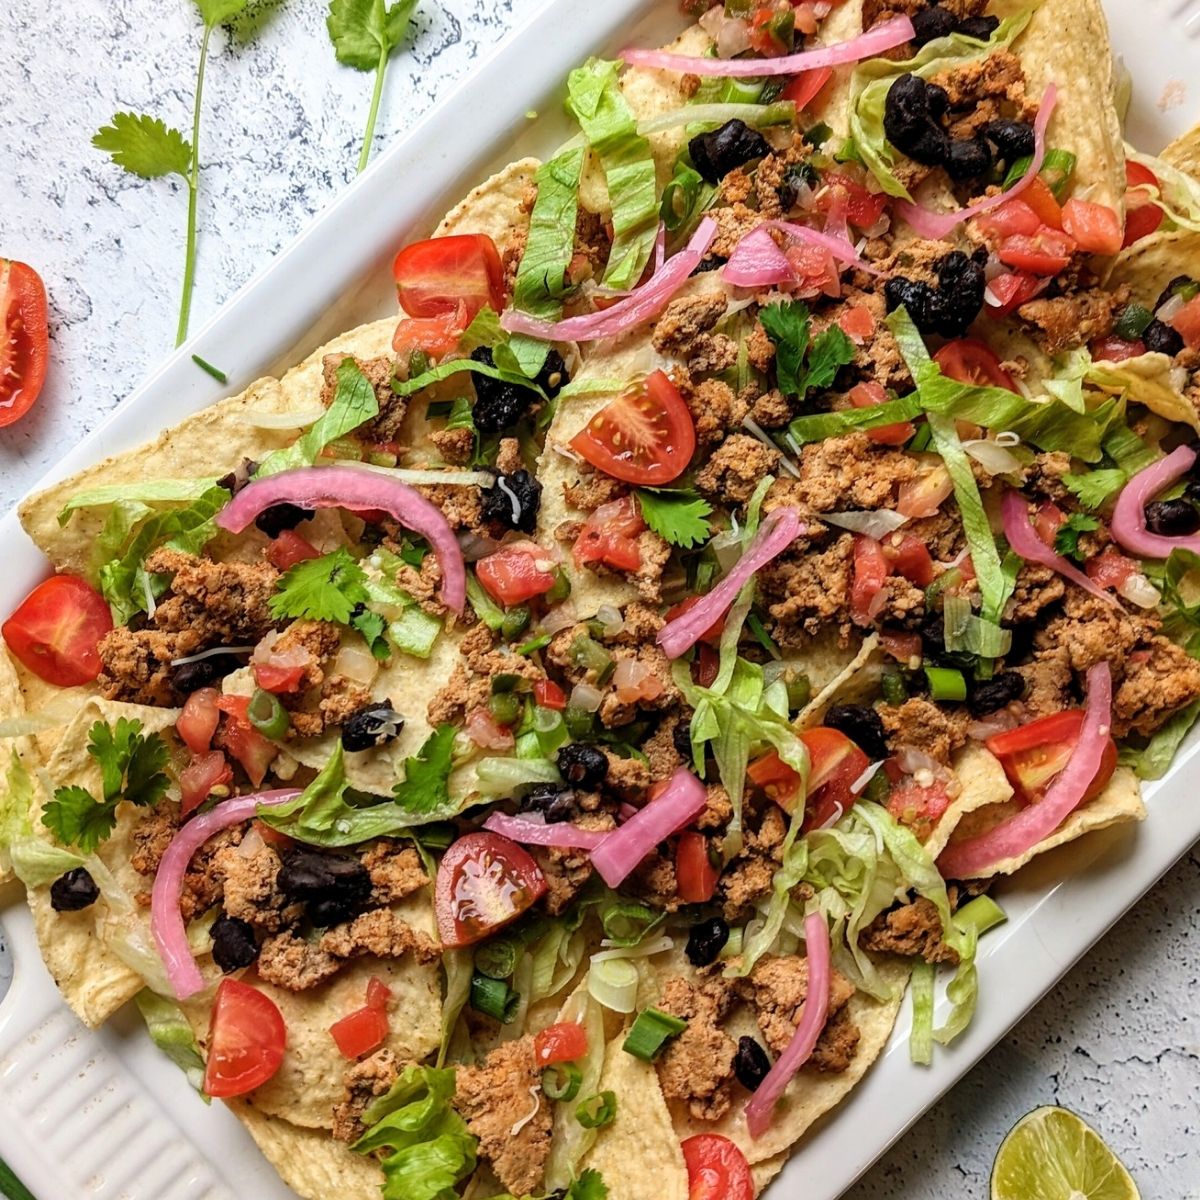 low sodium nachos recipe with unsalted tortilla chips, black beans, cilantro, salsa, and tomatoes